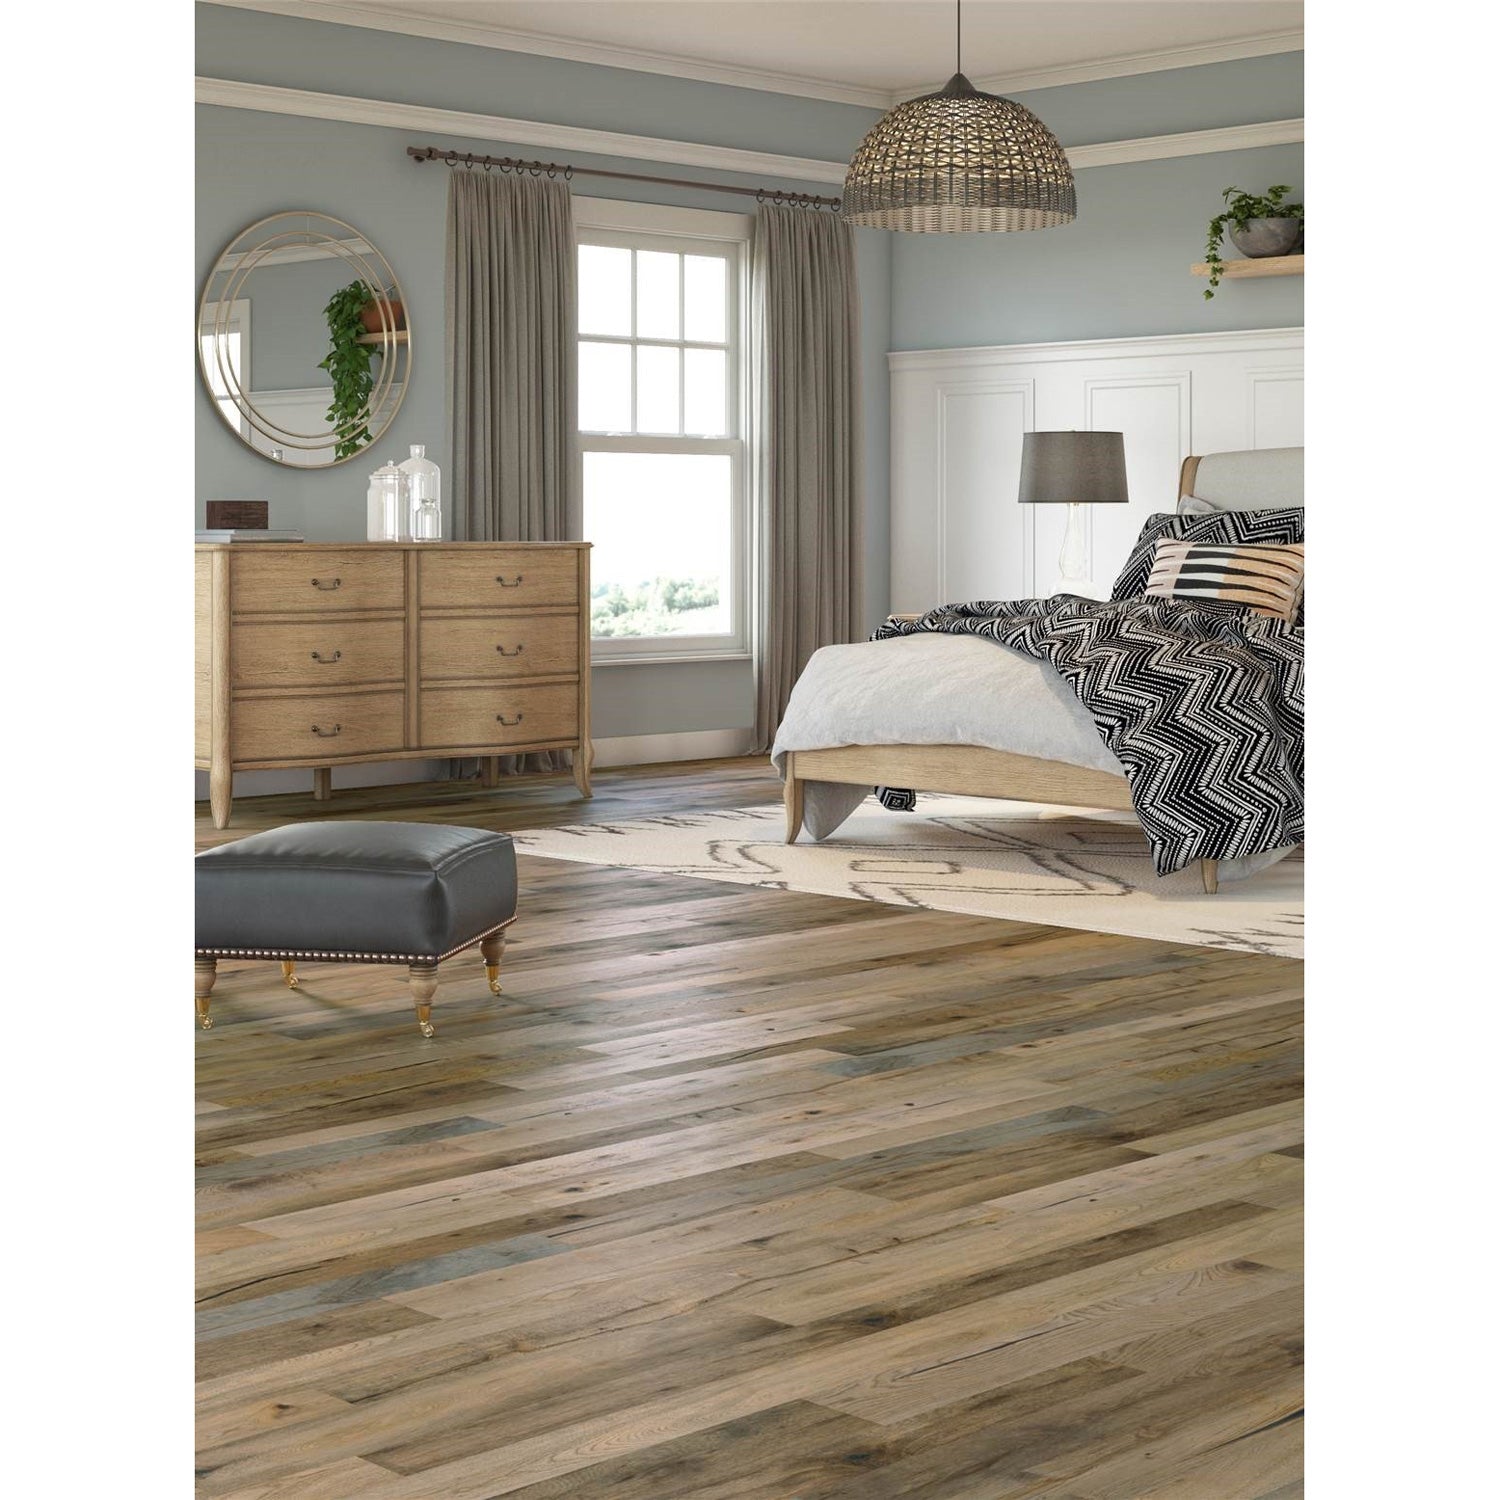 LM Flooring - The Glenn Collection - Stag White Oak